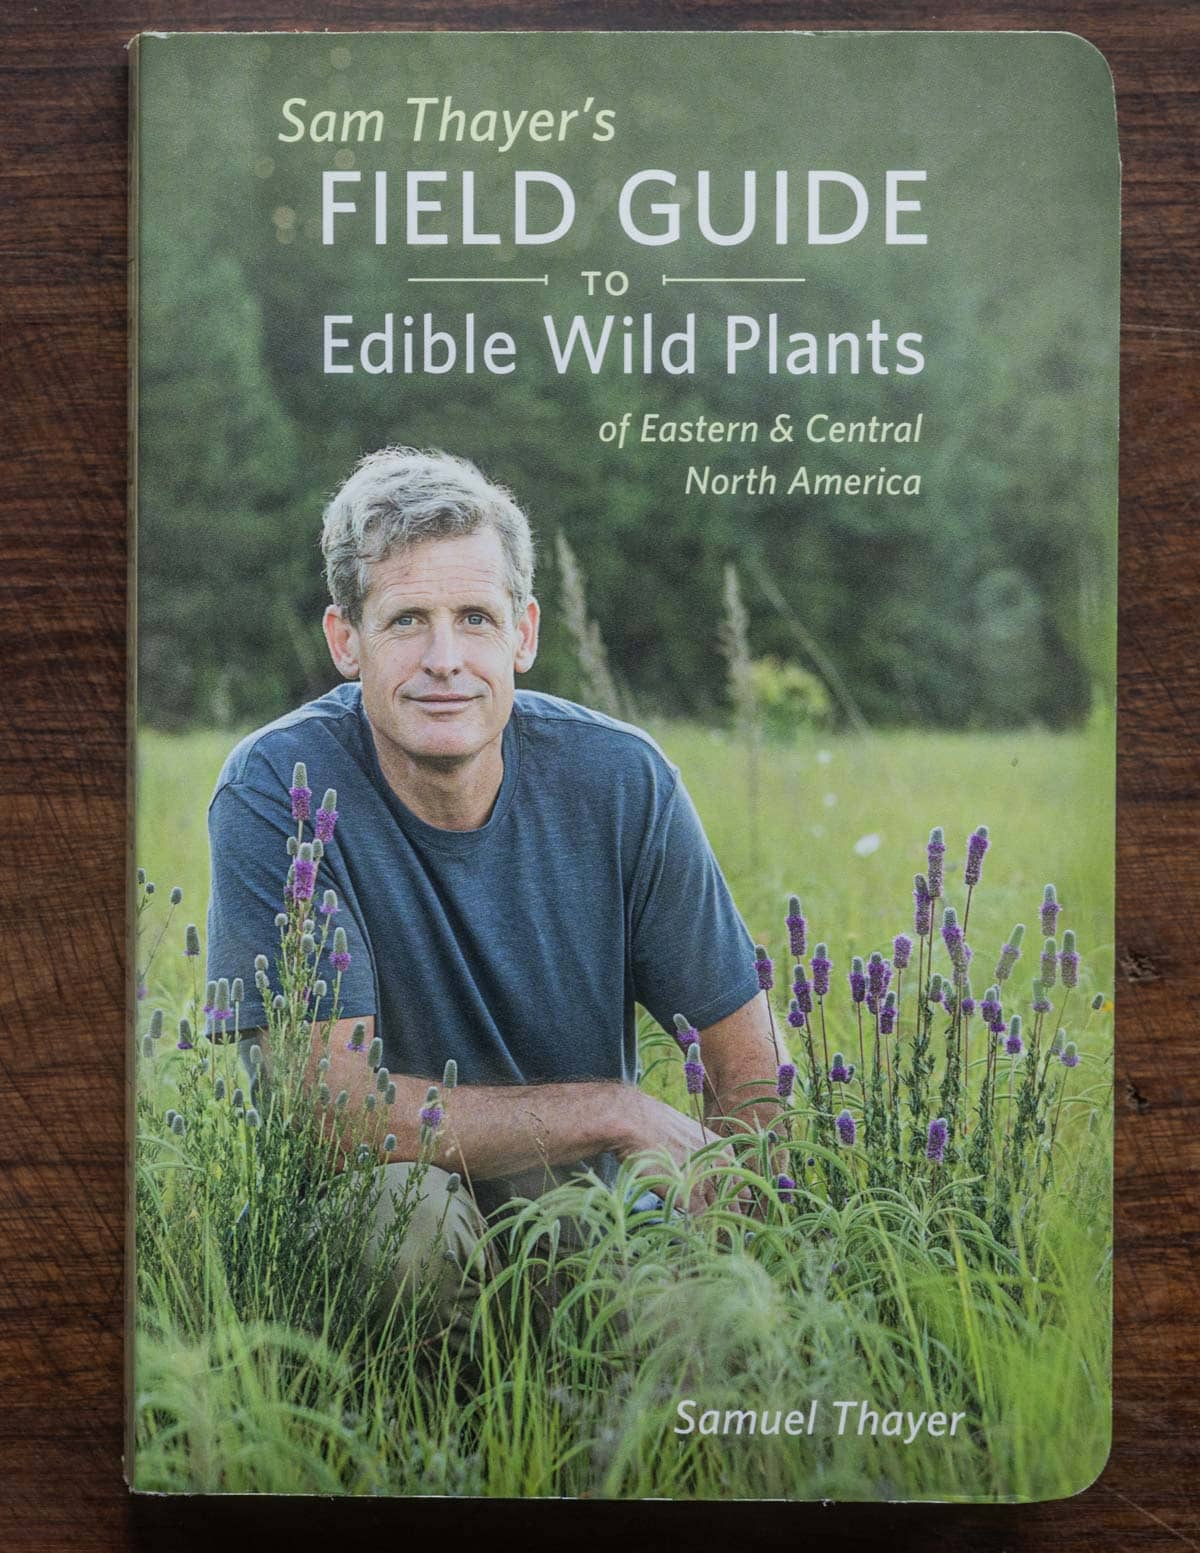 A picture of Sam Thayers field guide to wild edible plants.